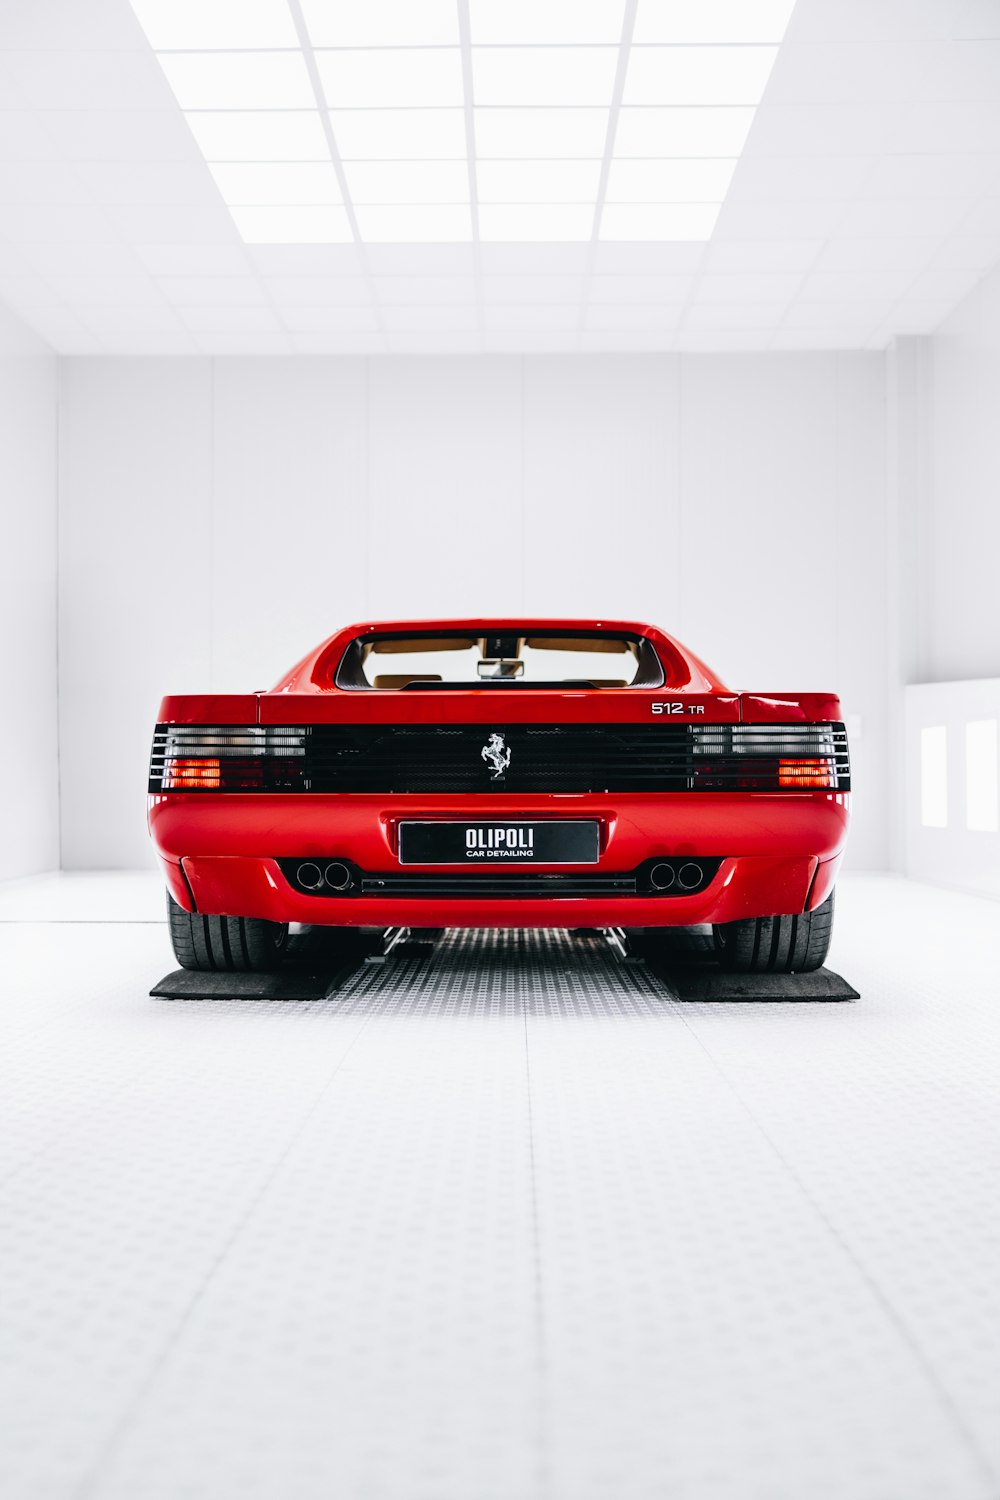 a red sports car parked in a white room